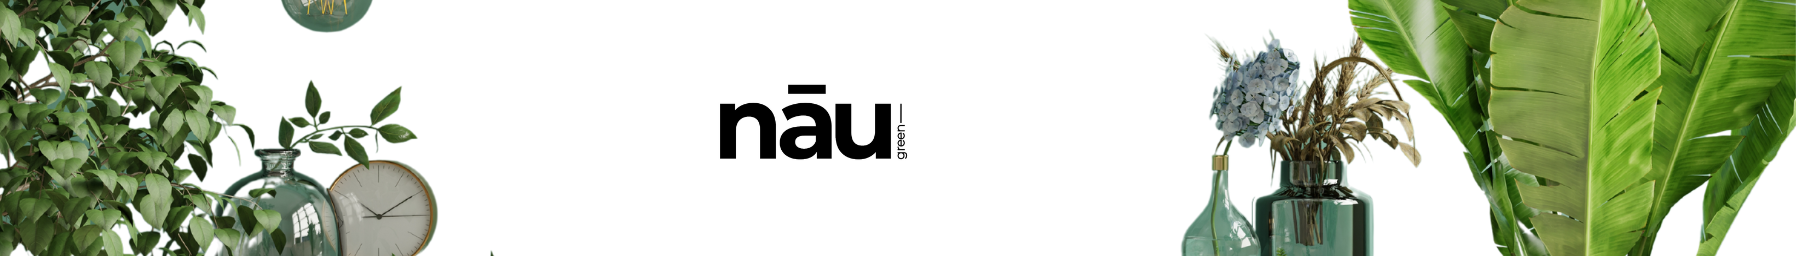 Nāu green - New supplier on Syncee Marketplace